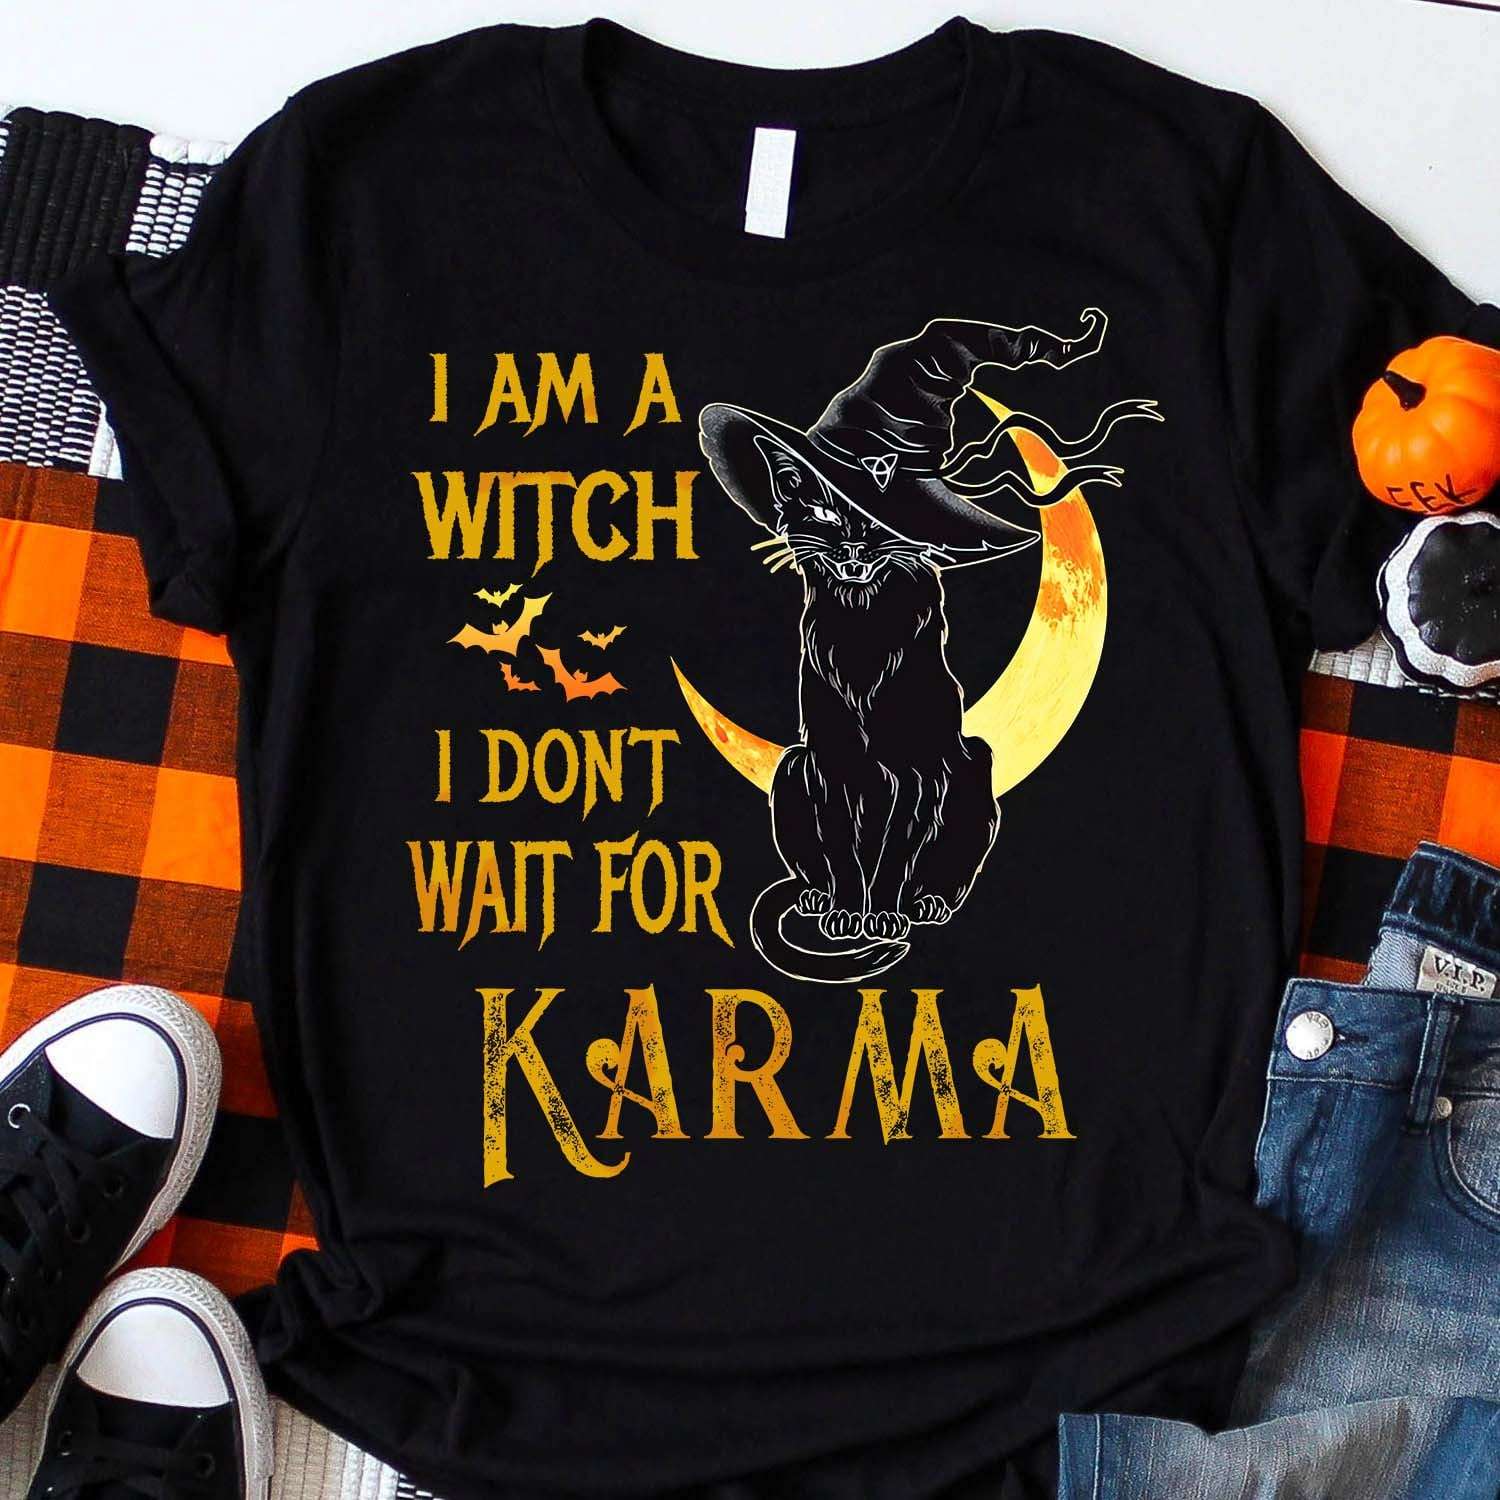 I am a witch I don't wait for Karma - Black cat witch, halloween witch costume